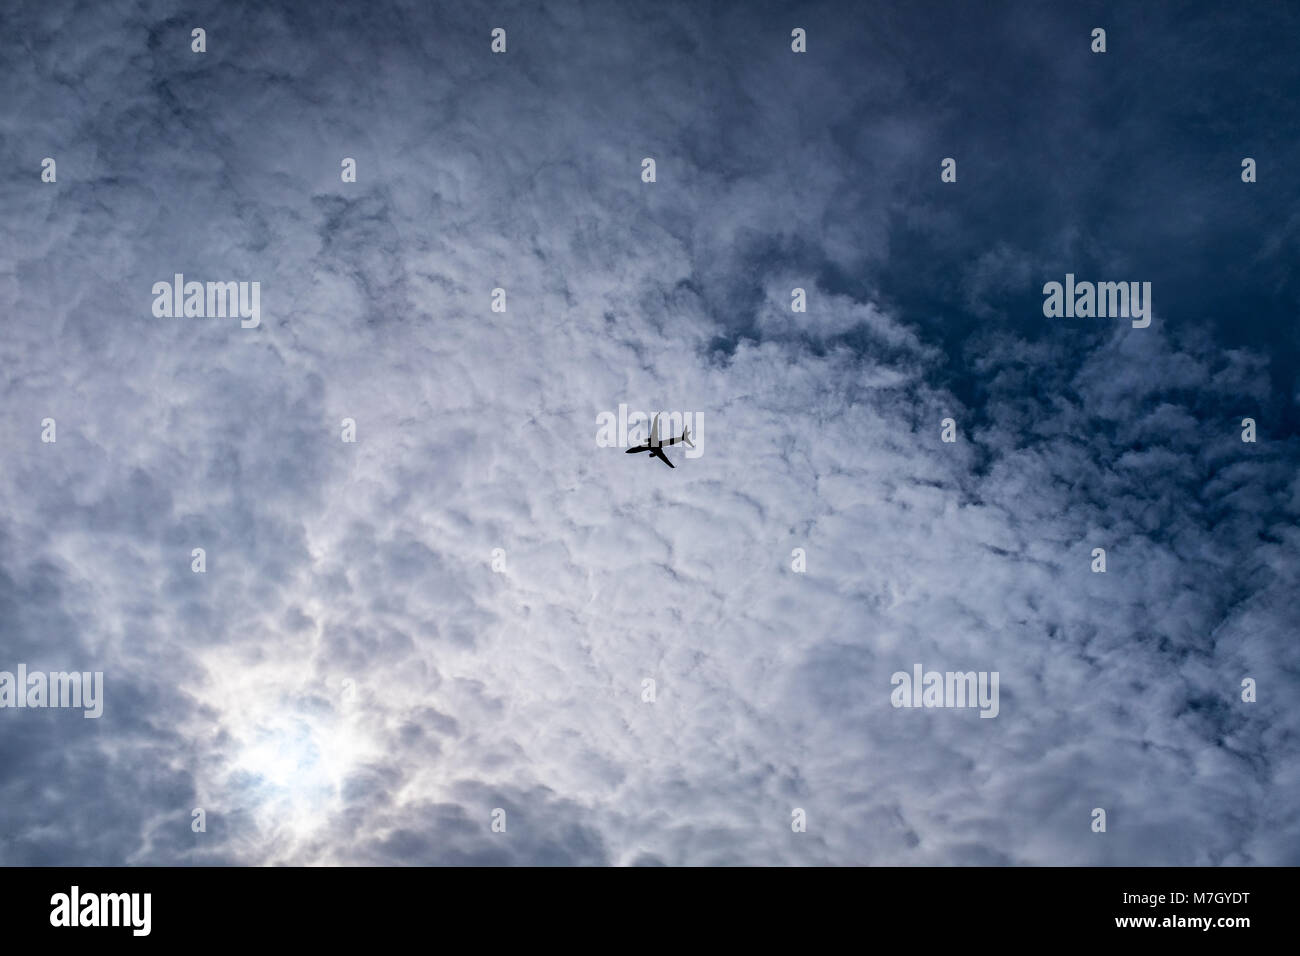 Airplane in silhouette flying across textured cirrocumulus clouds seen from the ground Stock Photo